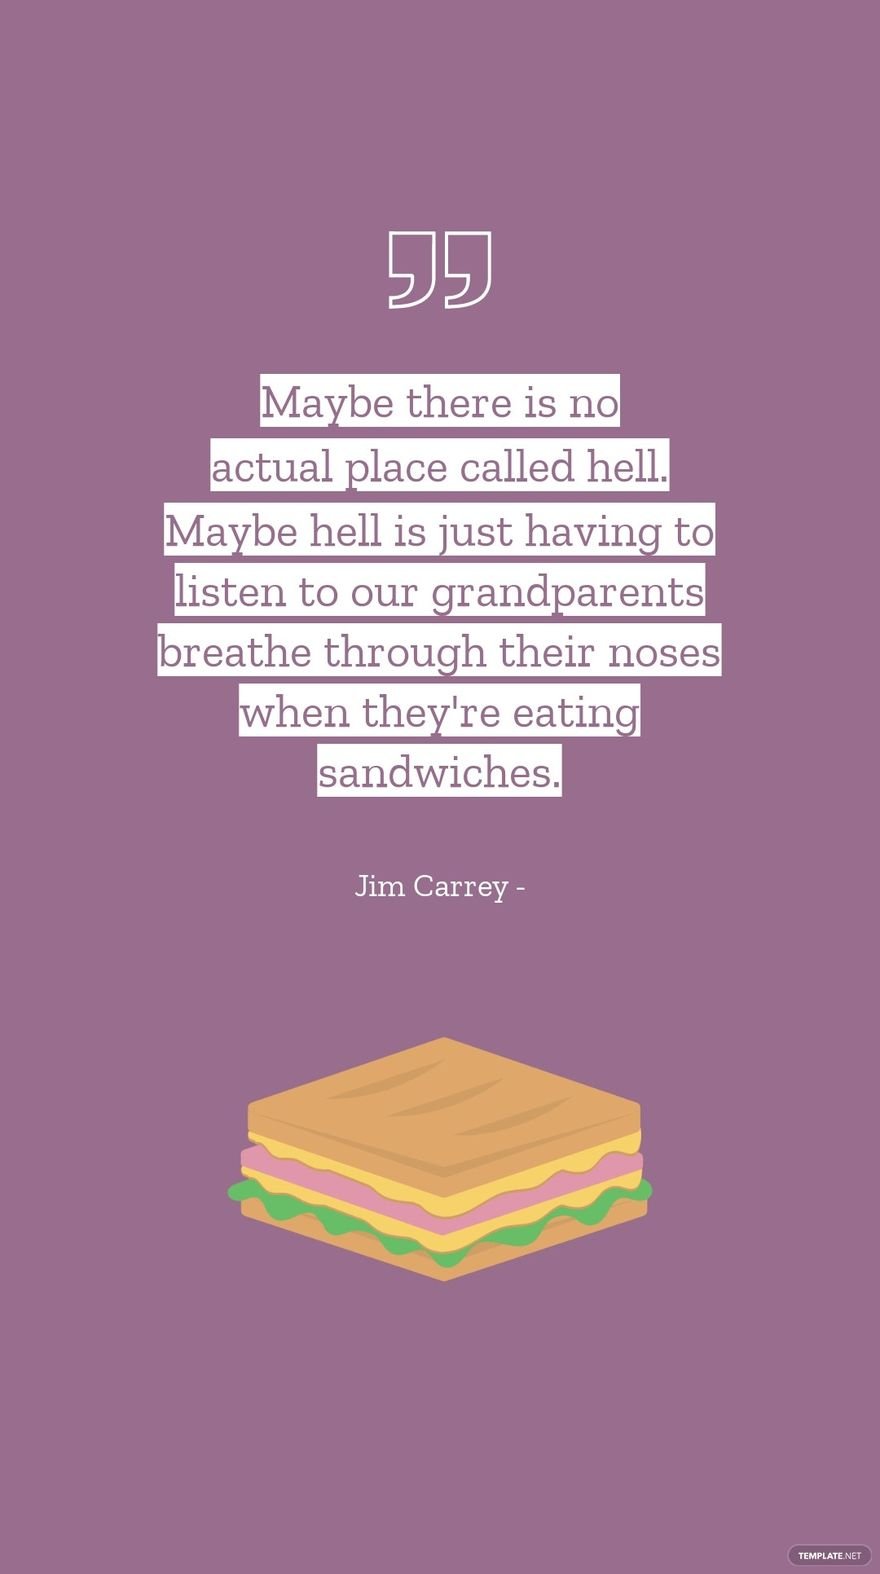 Jim Carrey - Maybe there is no actual place called hell. Maybe hell is just having to listen to our grandparents breathe through their noses when they're eating sandwiches.